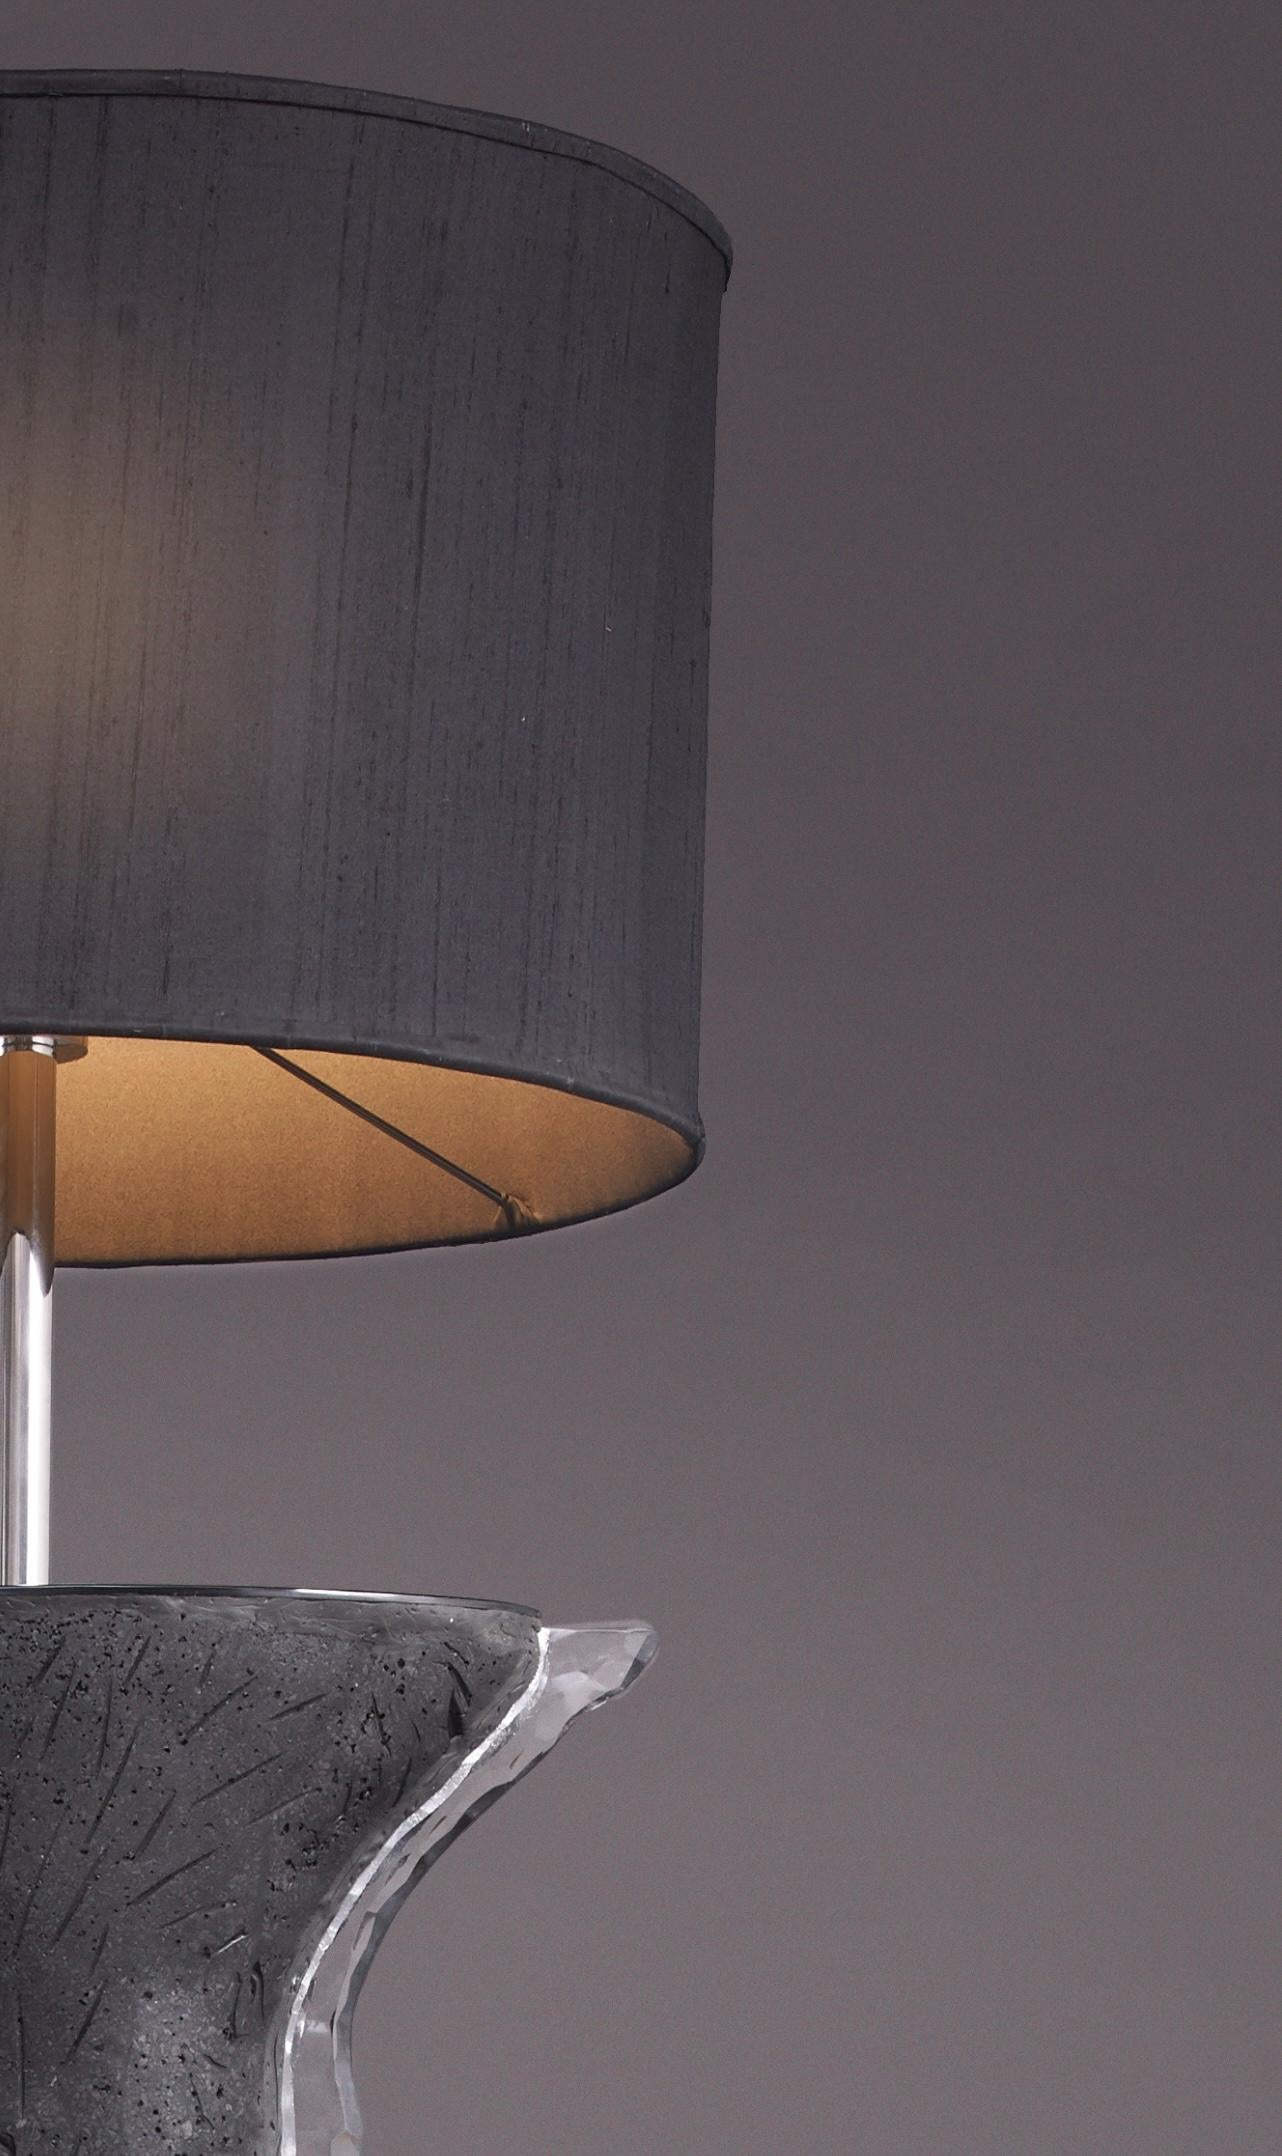 Marrying the fine with organic materiality, the mixed-media Silhouette floor lamp is handcrafted in carbon with a signature crystal shadow and is shielded by a rich woven silk lampshade. With its bold, curvaceous form, luminosity and functionality,